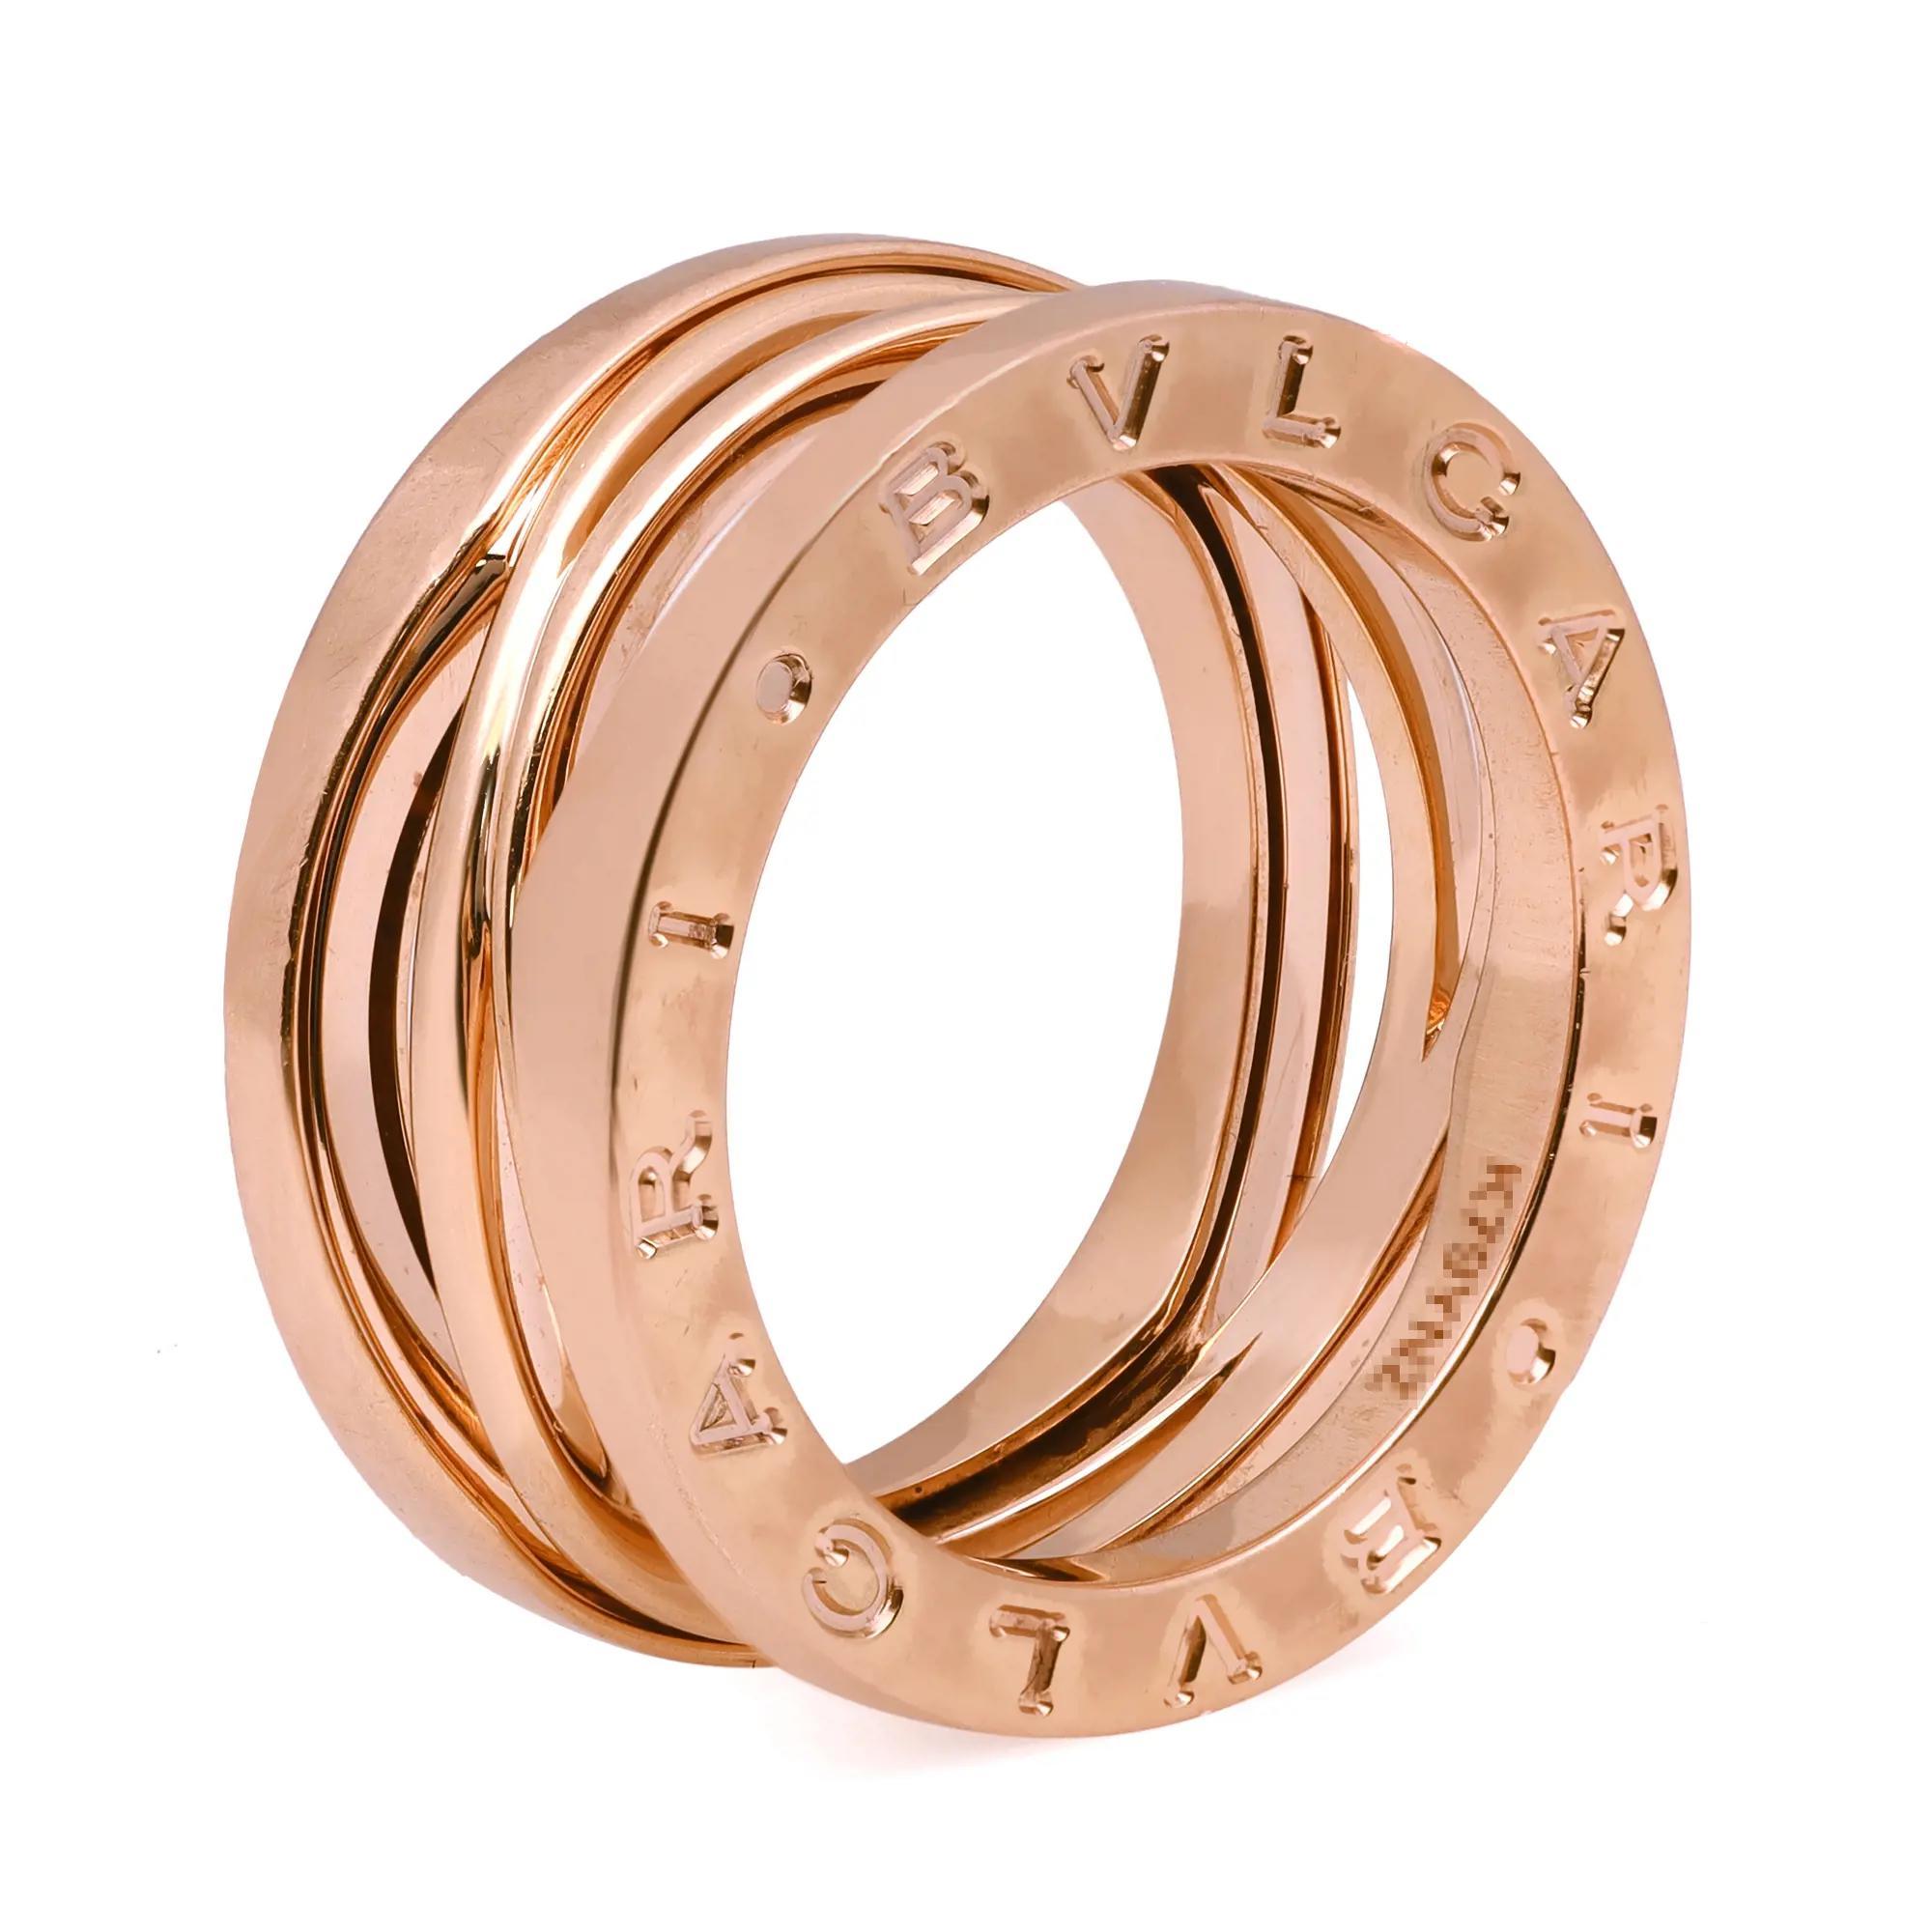 B.zero1 Design Legend jewelry is a perfect collision of modernity and tradition. Crafted in fine 18K rose gold. It features a clean modern three band ring engraved with the BVLGARI logo on both sides. This ring makes a great timeless and modern